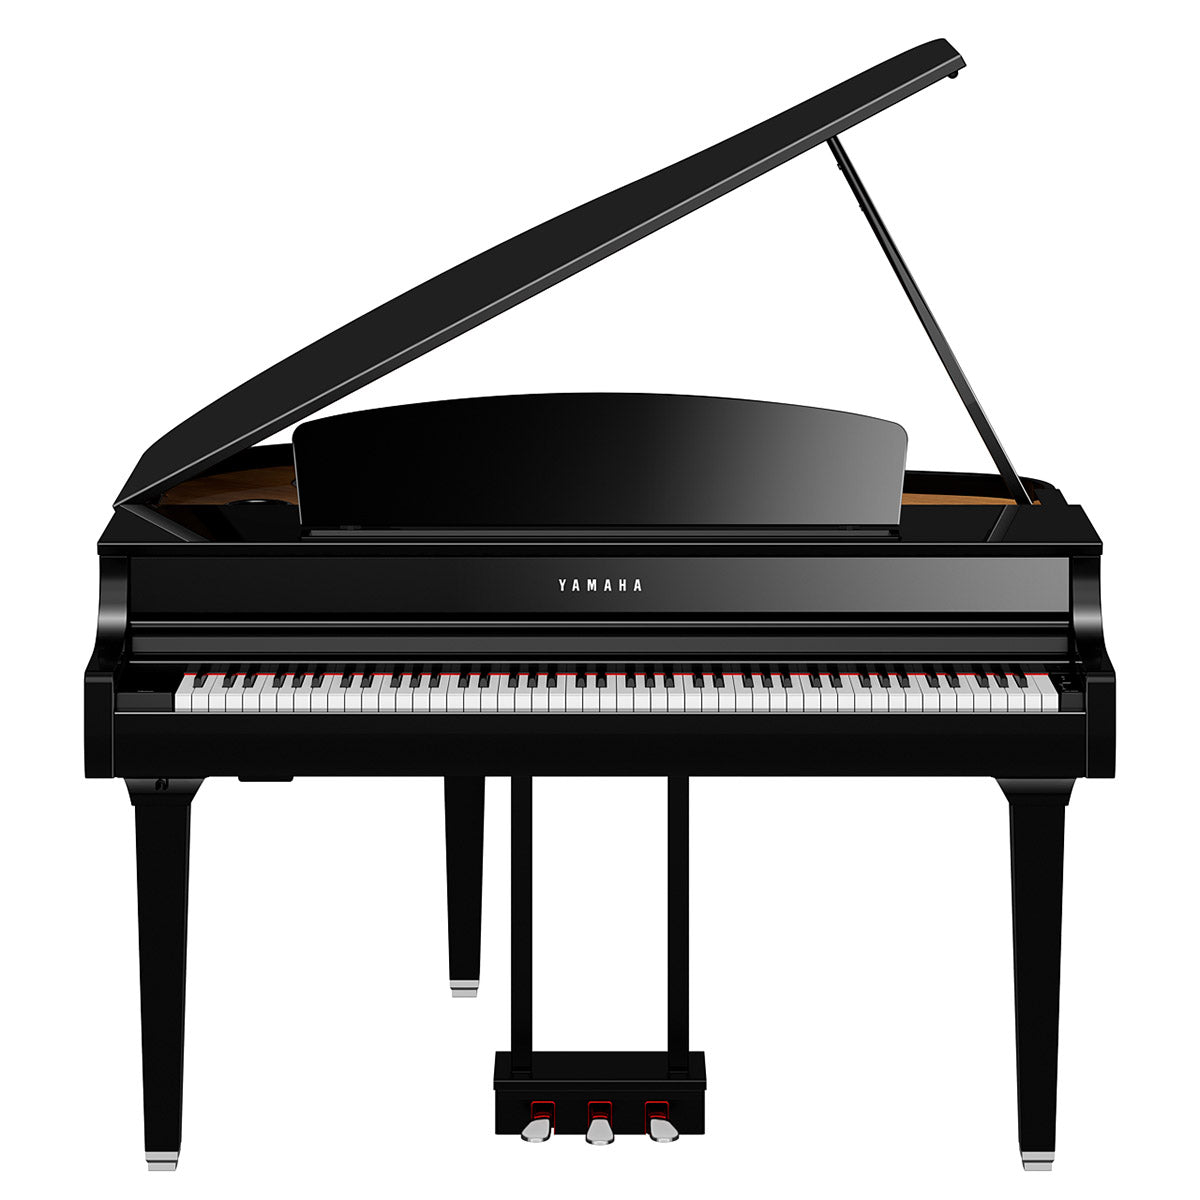 Perspective view of Yamaha Clavinova CLP-795GP Digital Piano - Polished Ebony showing front and top